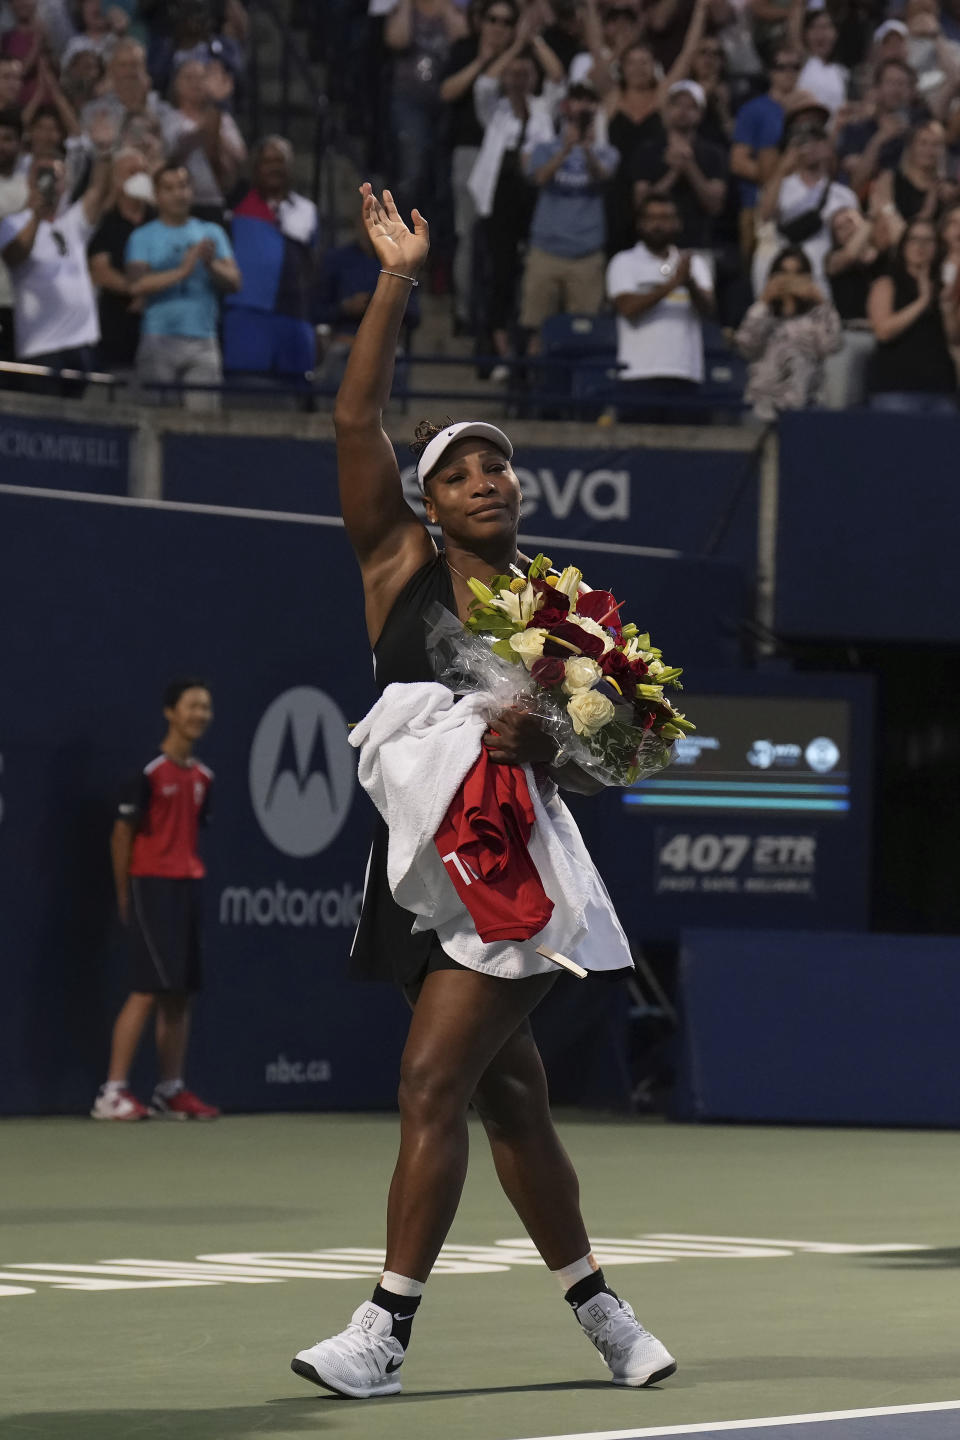 Serena Williams, of the United States, leaves the court carrying flowers and waving to fans after her loss to Belinda Bencic, of Switzerland, during the National Bank Open tennis tournament Wednesday, Aug. 10, 2022, in Toronto. (Chris Young/The Canadian Press via AP)